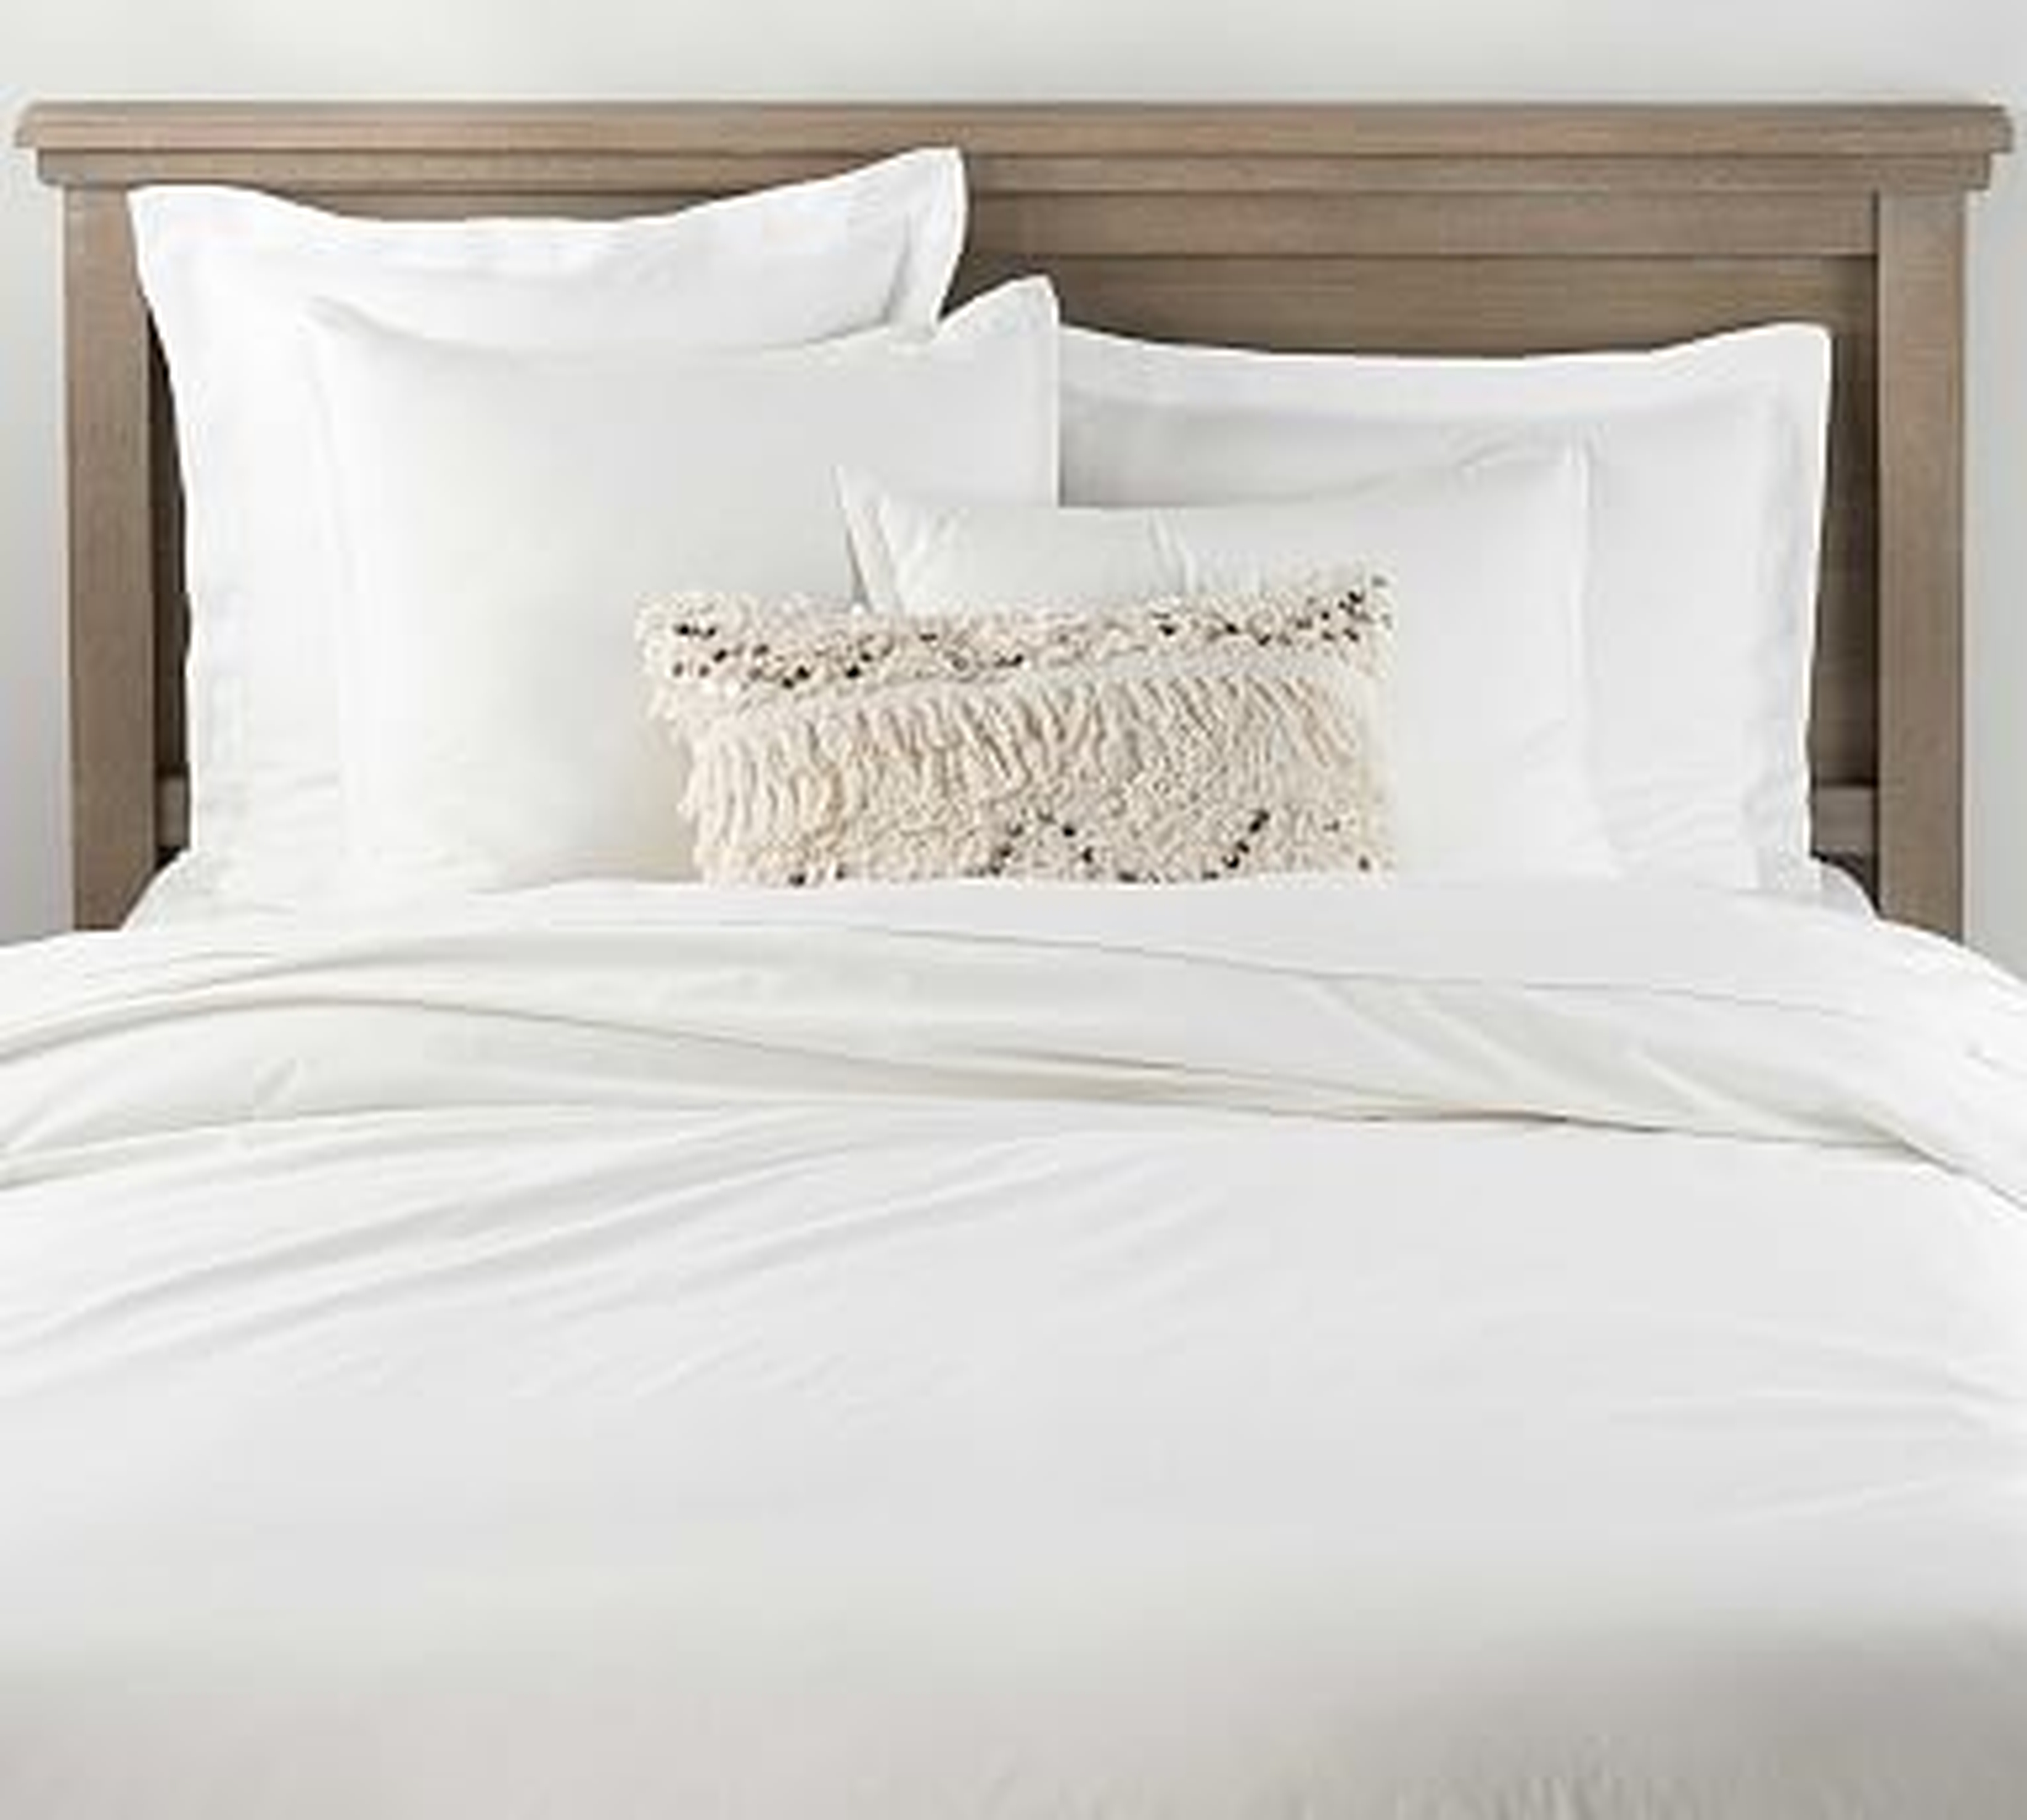 Spencer Washed Cotton Duvet, Twin, White - Pottery Barn